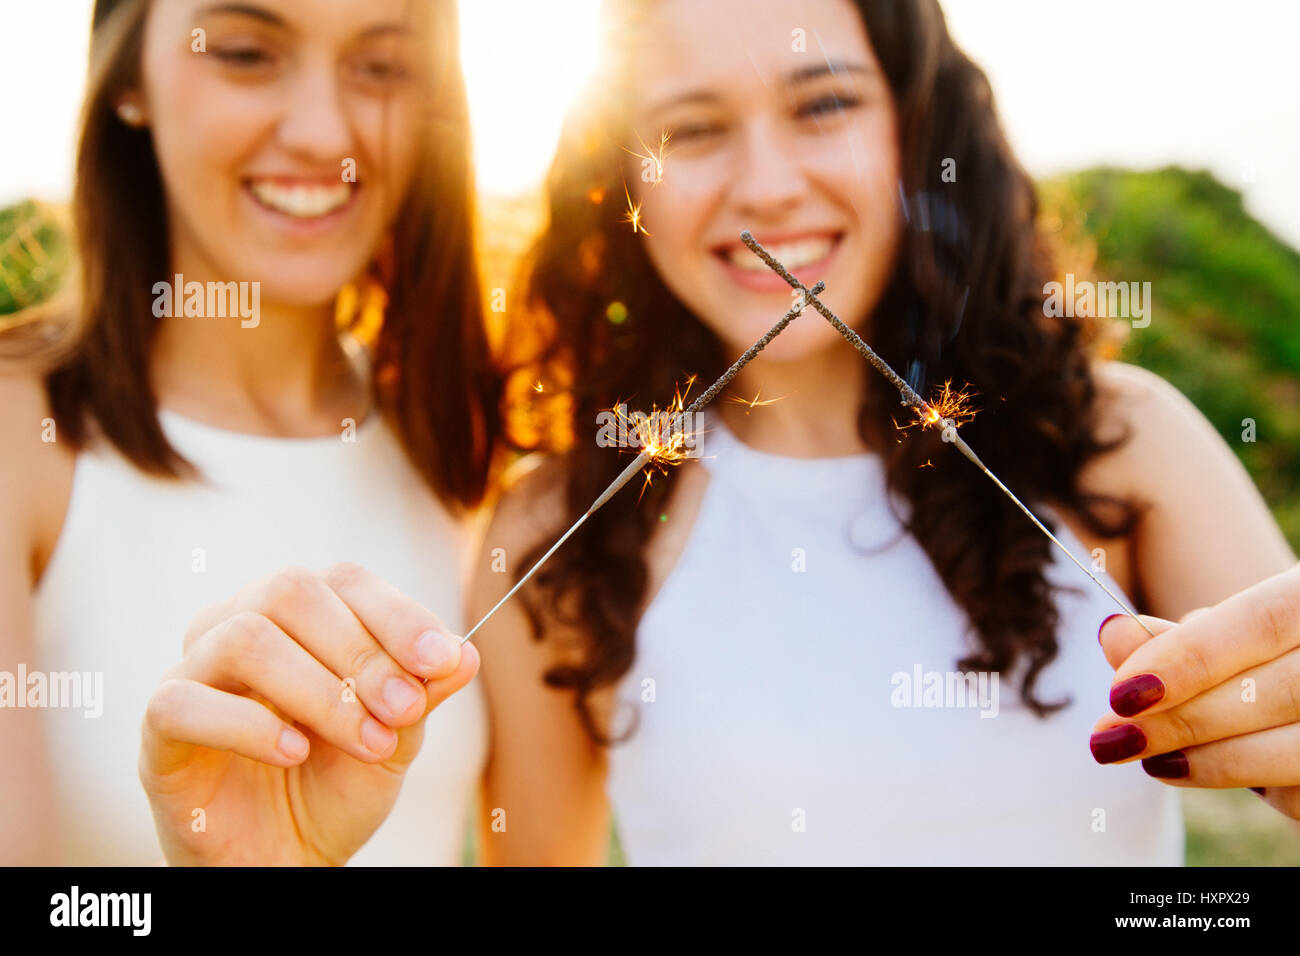 Happy female friends holding sparklers outdoors at sunset. Focus on sparks. Stock Photo